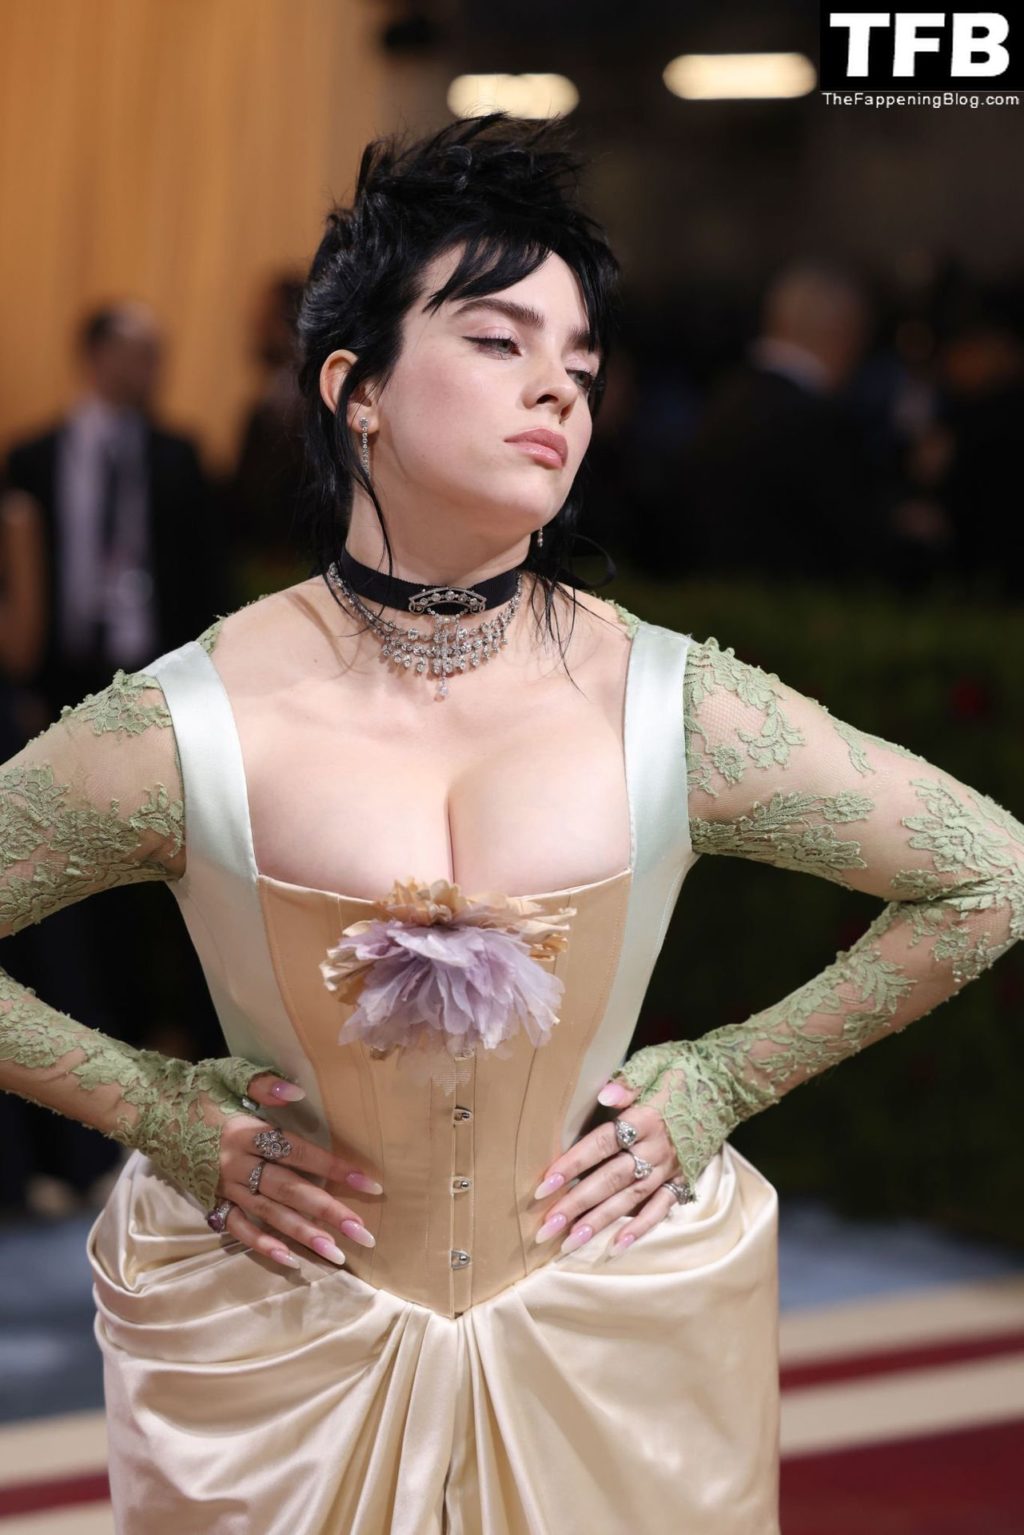 Billie Eilish Sexy The Fappening Blog 63 1024x1535 - Billie Eilish Showcases Nice Cleavage at The 2022 Met Gala in NYC (155 Photos)